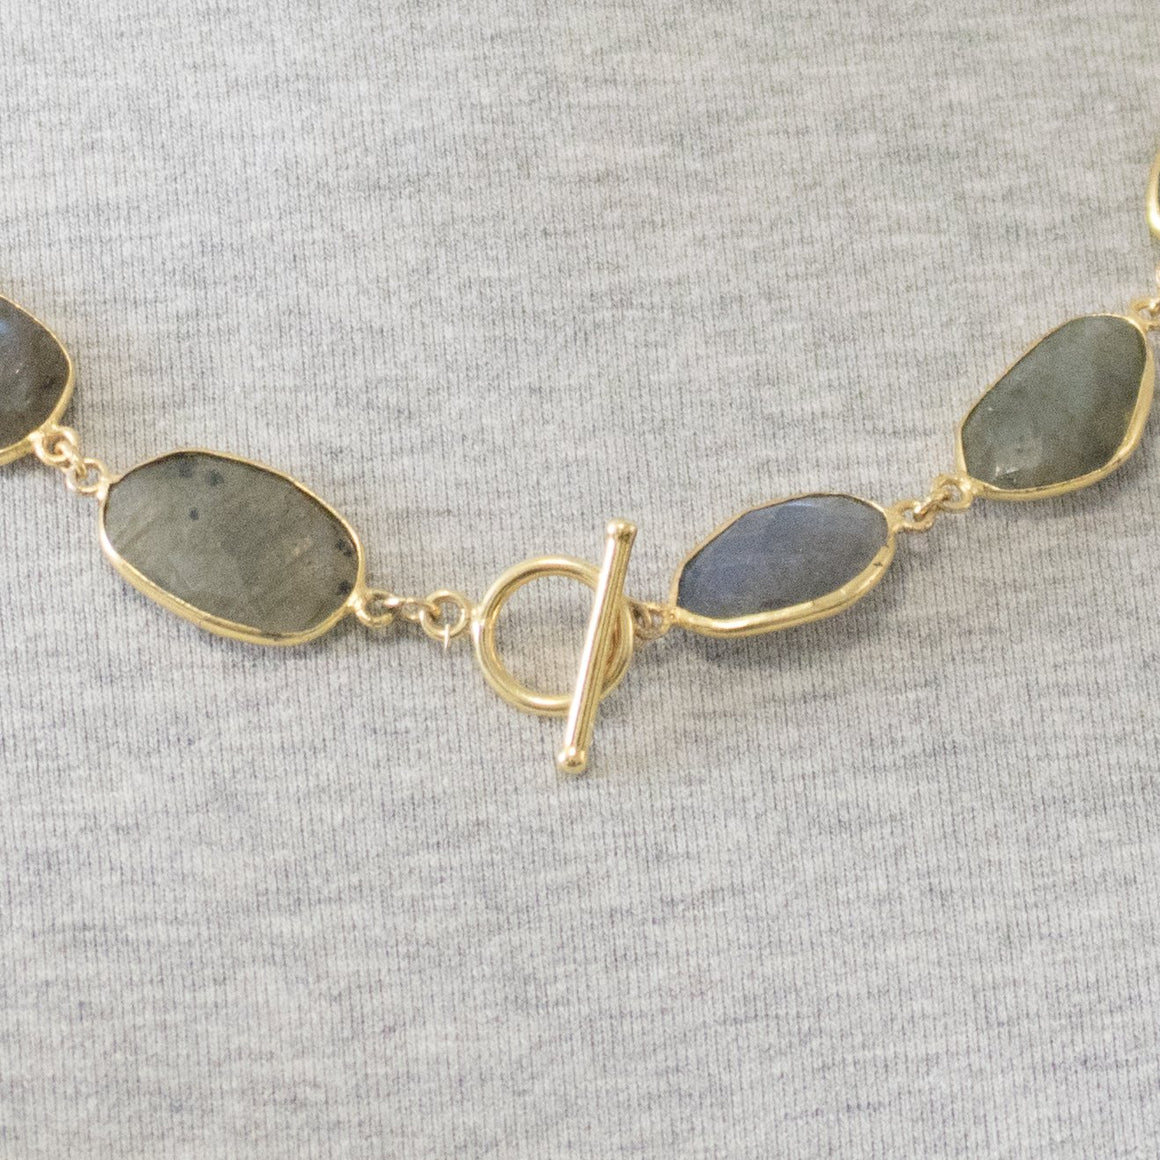 LABRADORITE GOLD FILLED CHAIN NECKLACE NECKLACE ZENZOEY JEWELRY & ACCESSORIES 